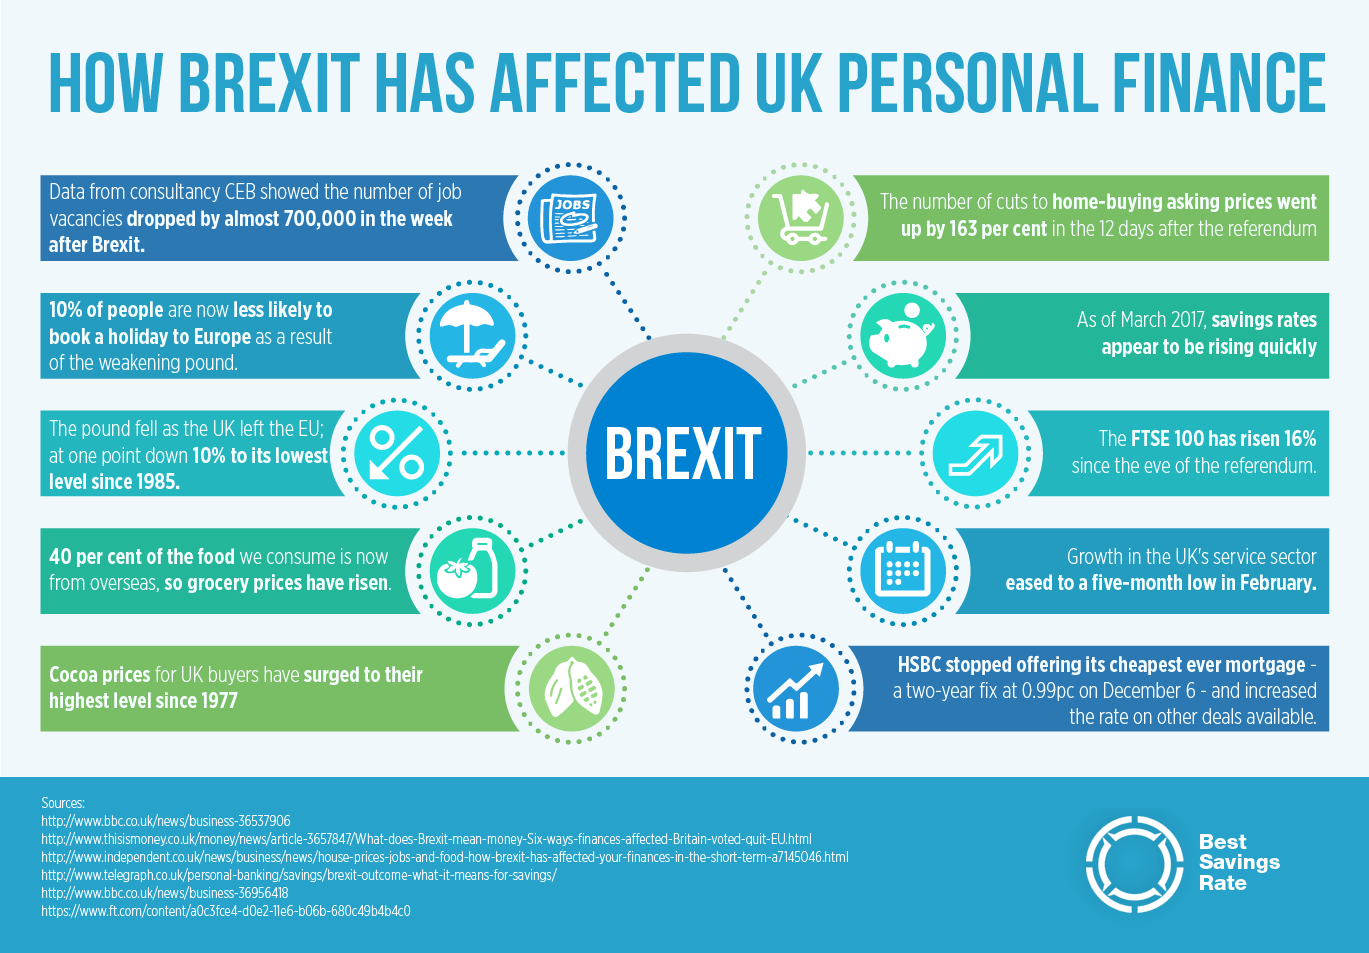 How the Brexit Vote Has Affected UK Personal Finance